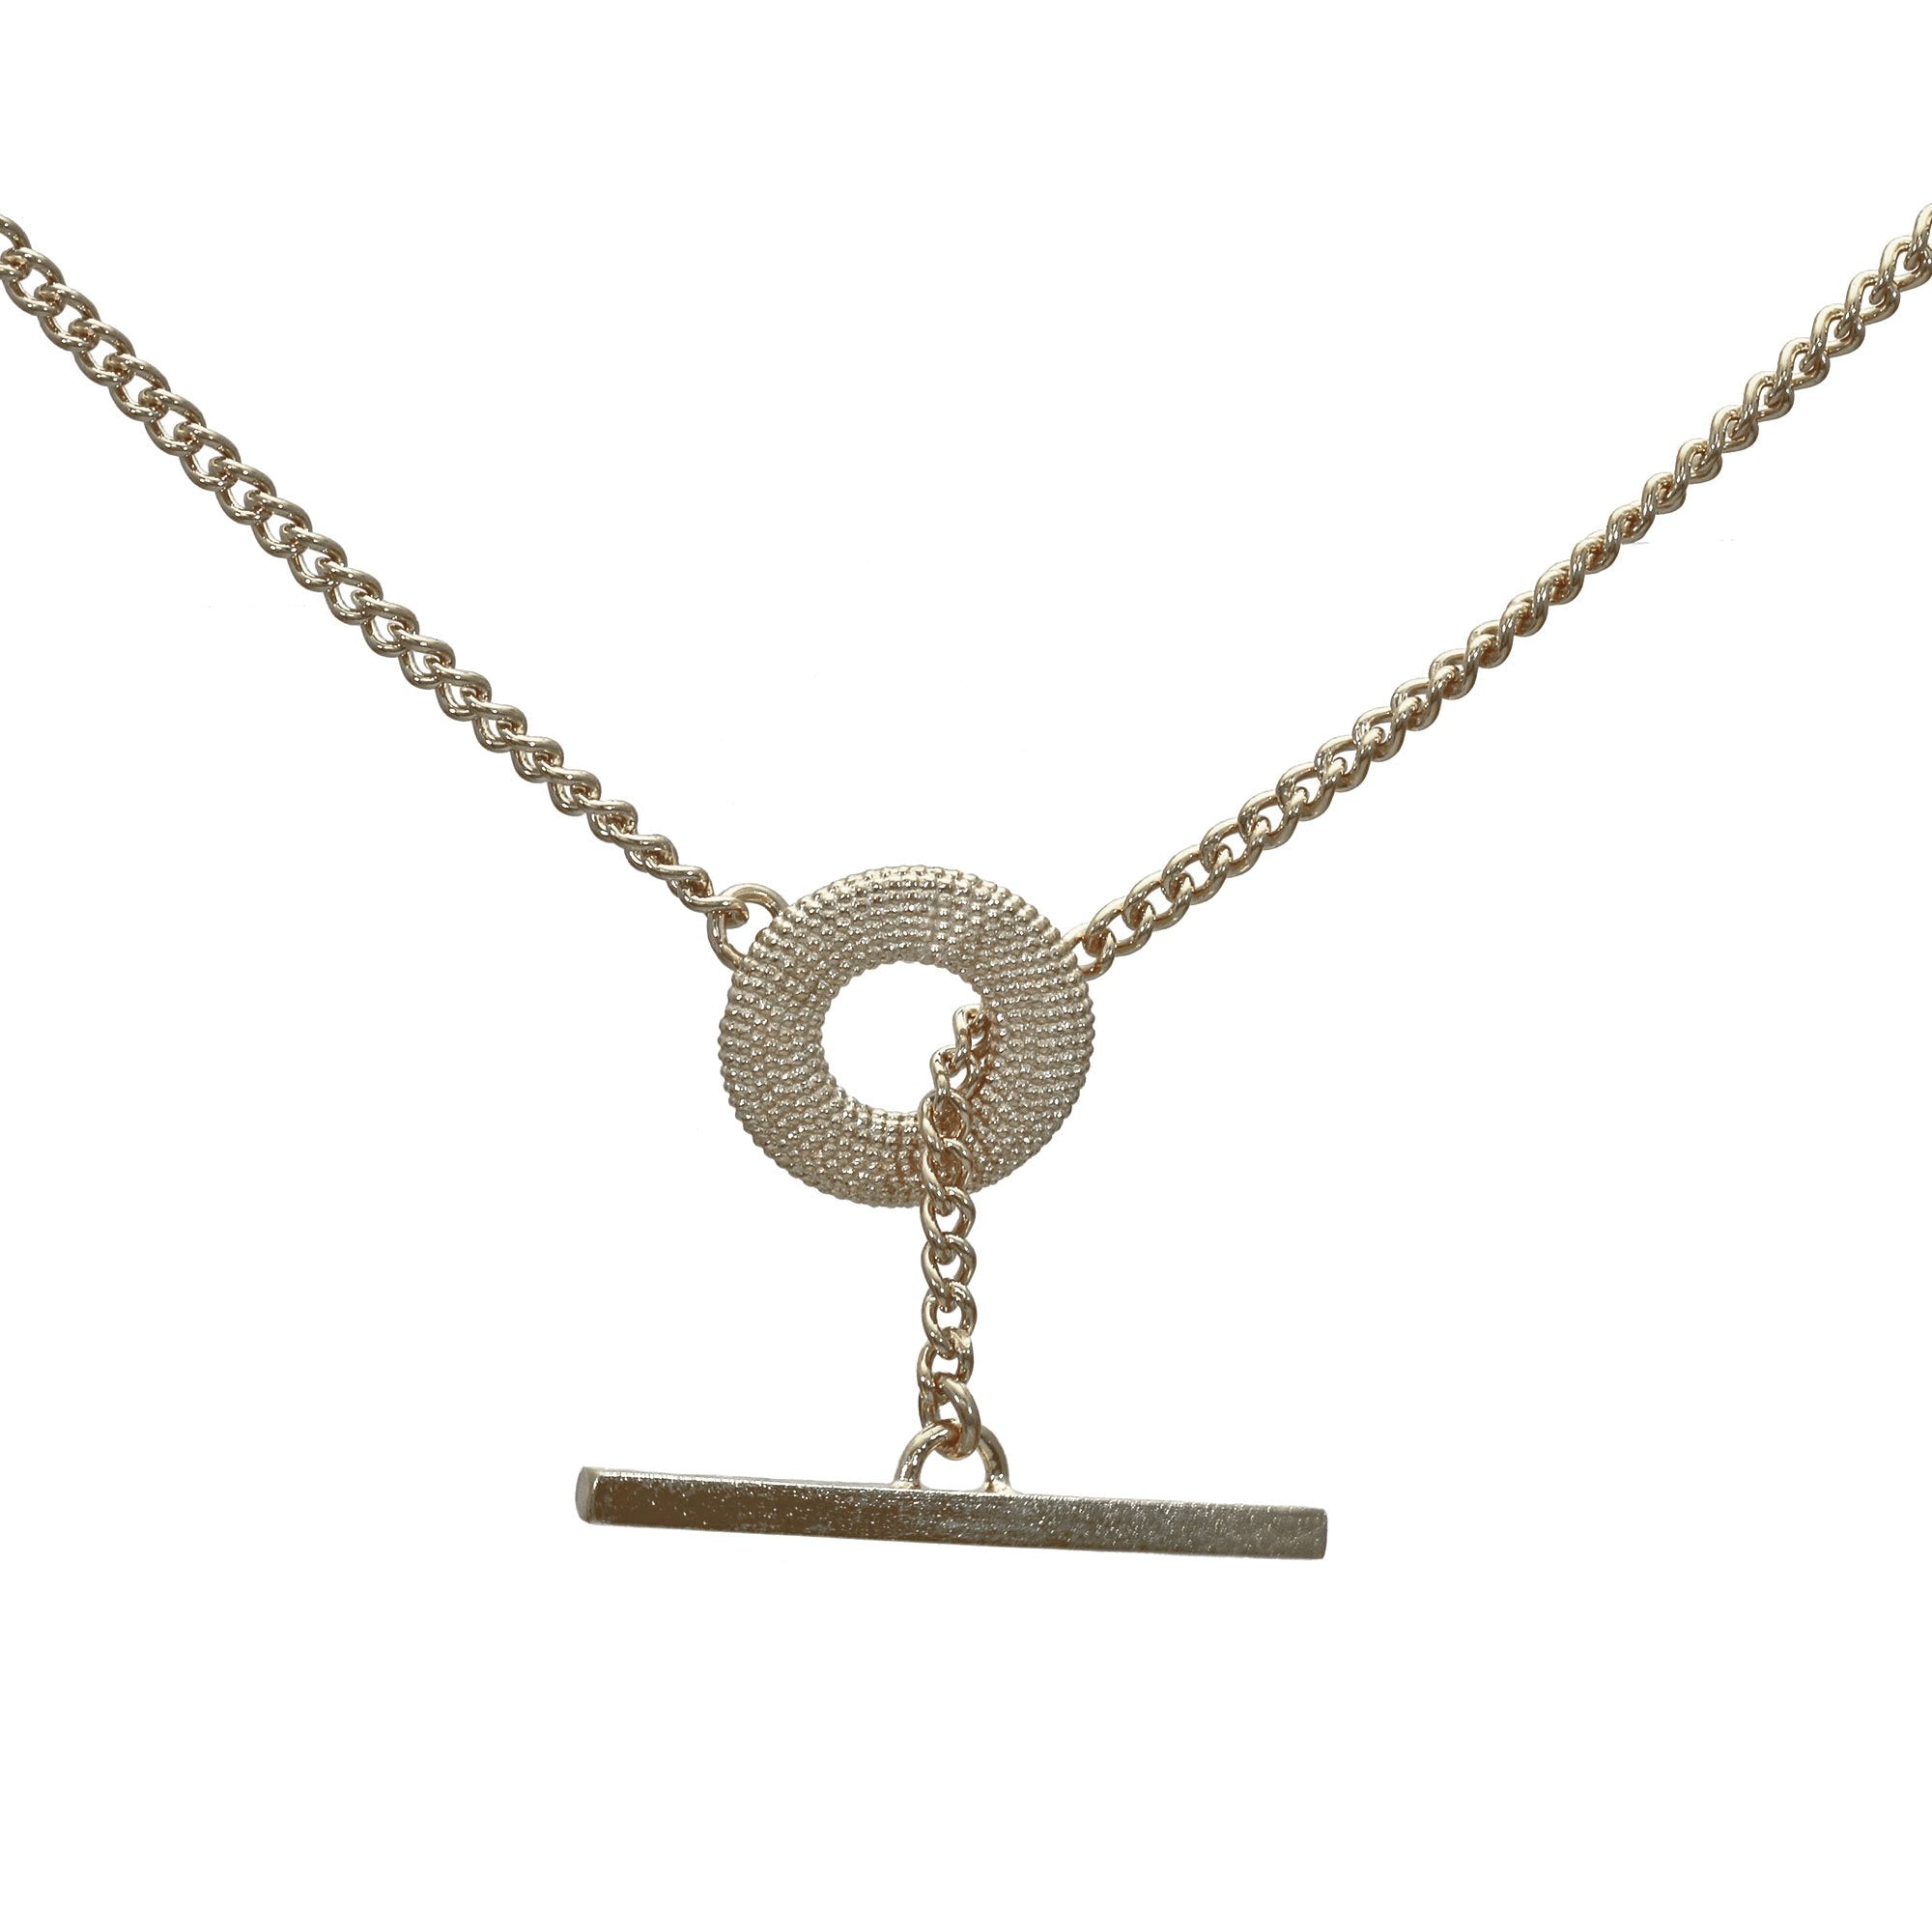 Chunky silver t-bar necklace